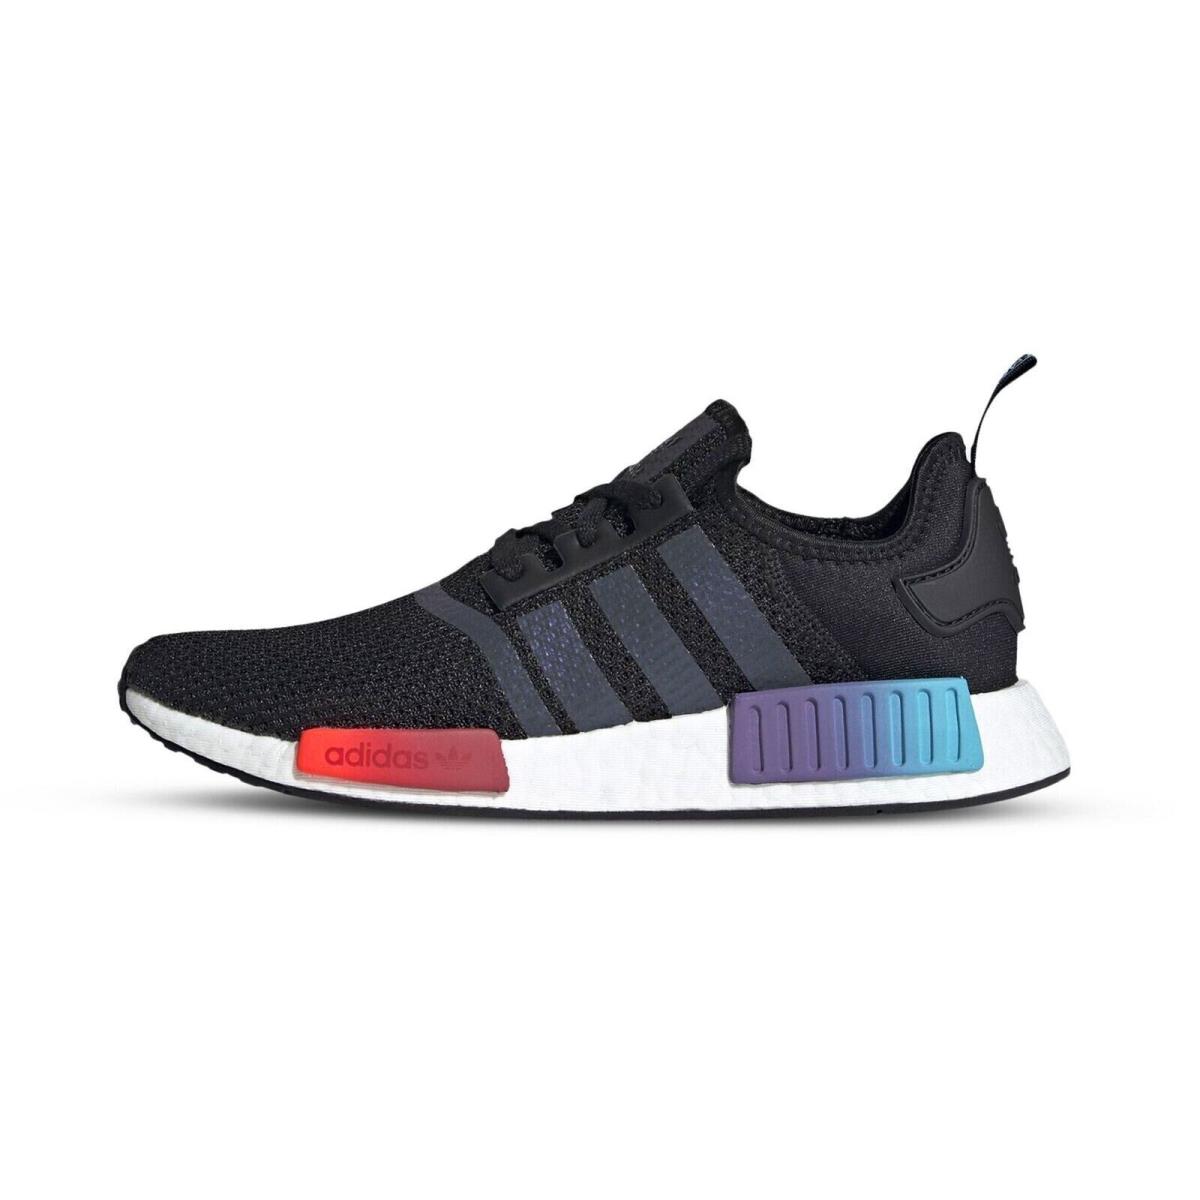 Adidas FW4365 Mens Nmd R1 Running Sneakers Shoes - Black